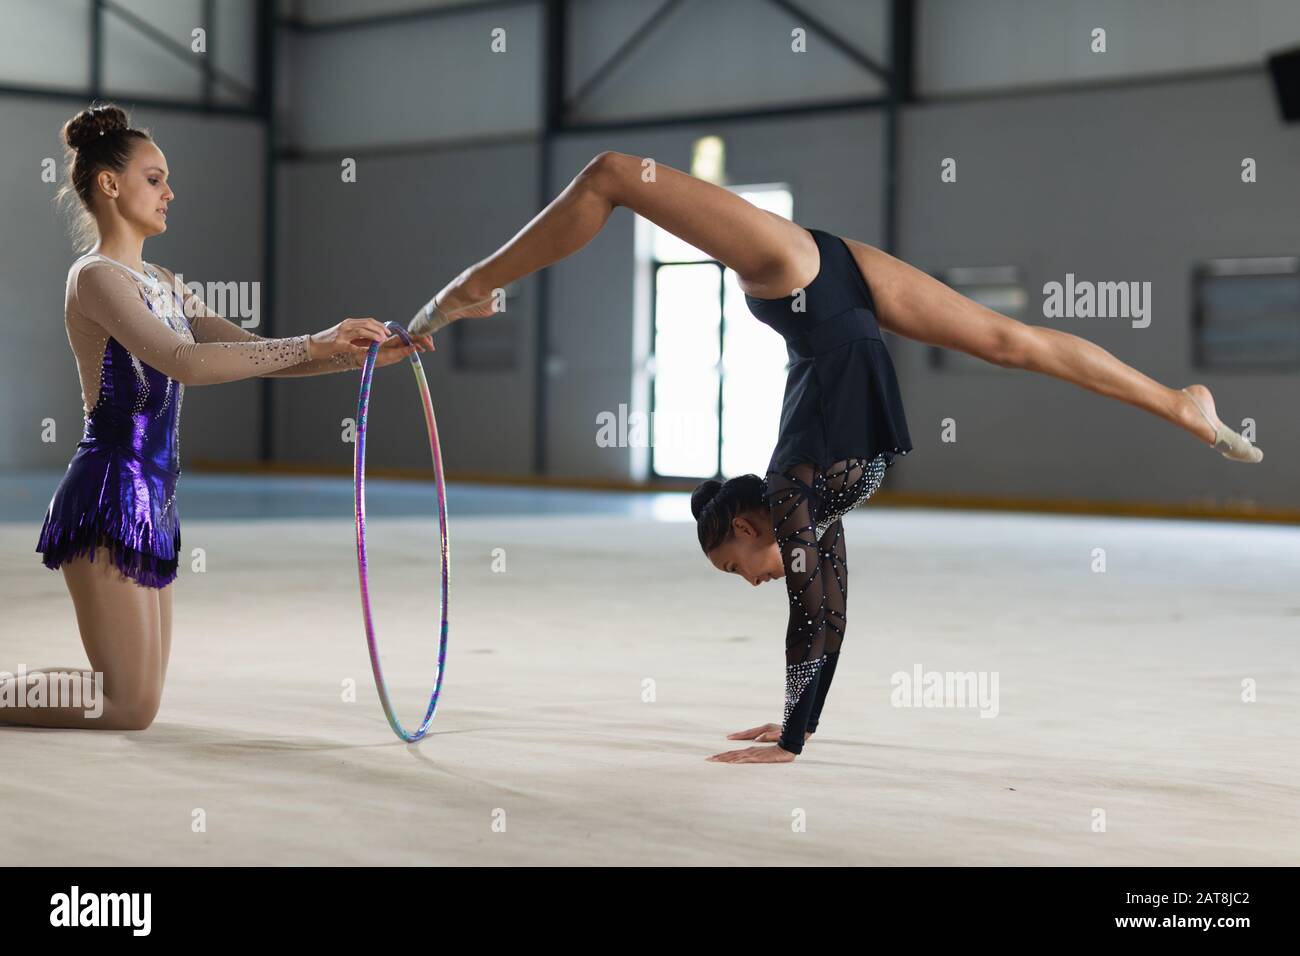 Gymnasts with a hoop Stock Photo